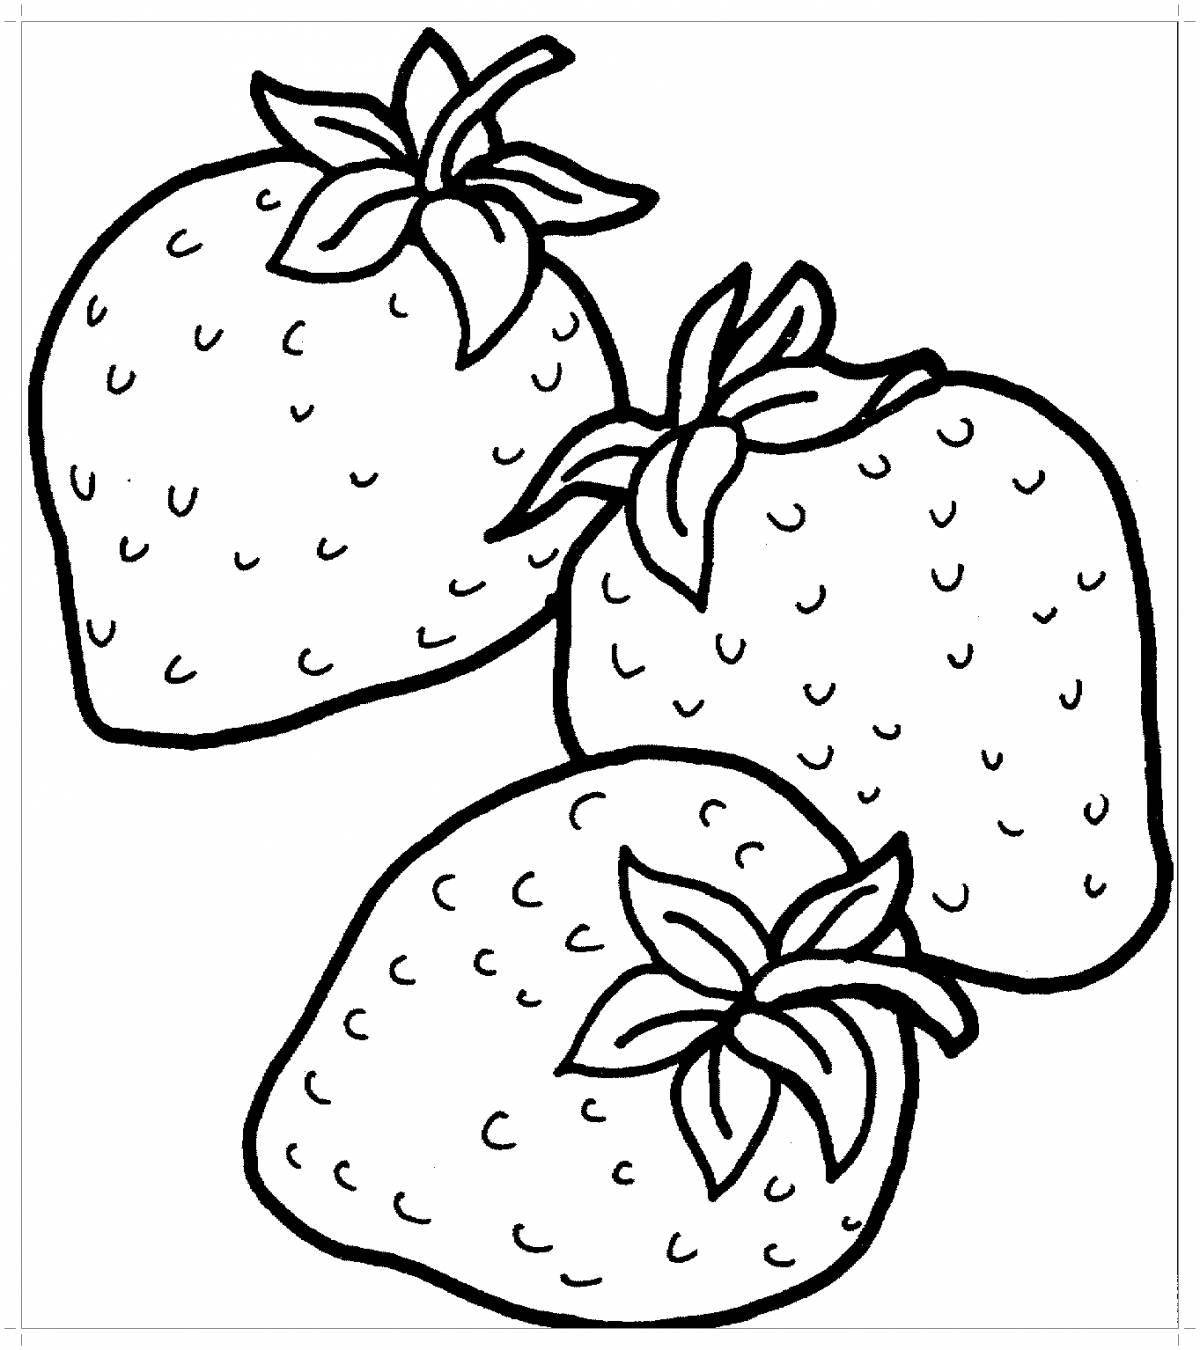 Bright strawberry coloring book for children 3-4 years old